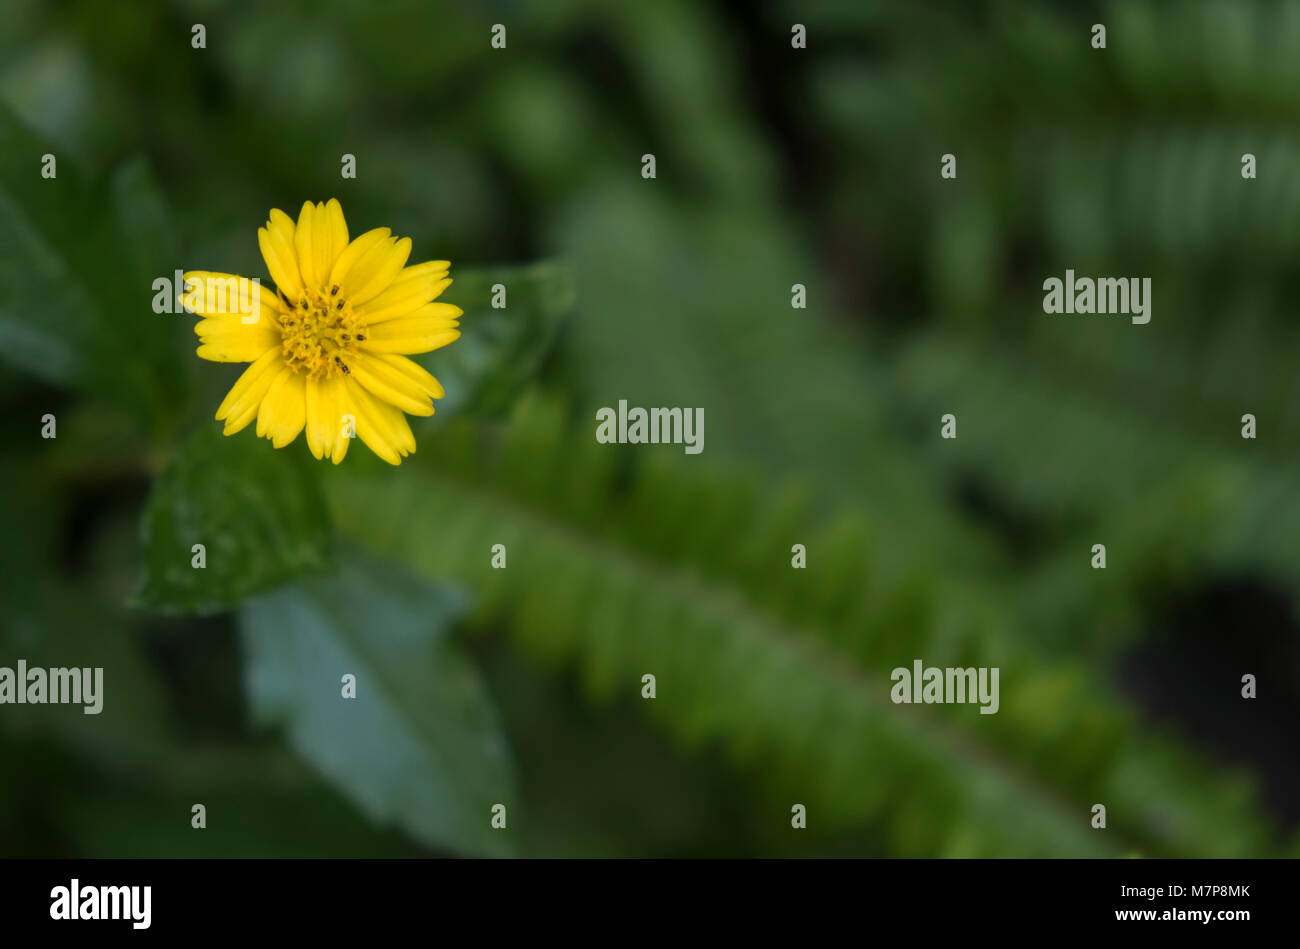 One yellow flower in green blur background. Sphagneticola trilobata or Wedelia. Stock Photo